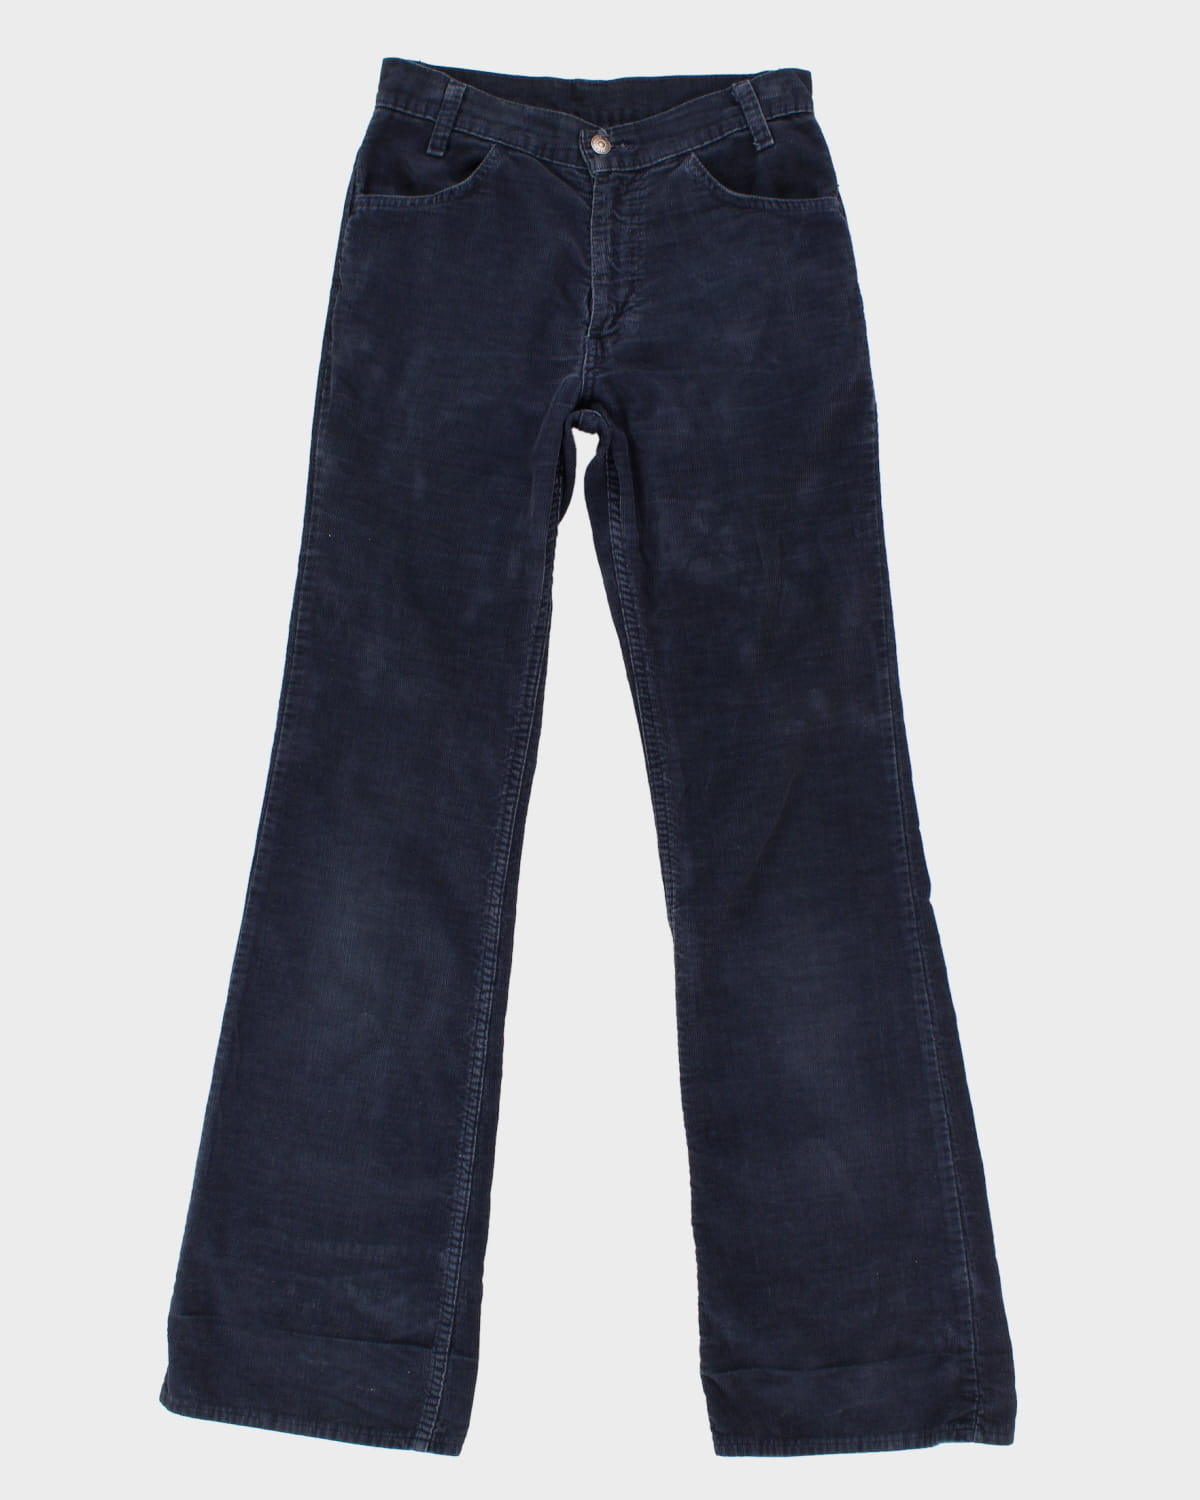 Womens Navy Levi's Trousers